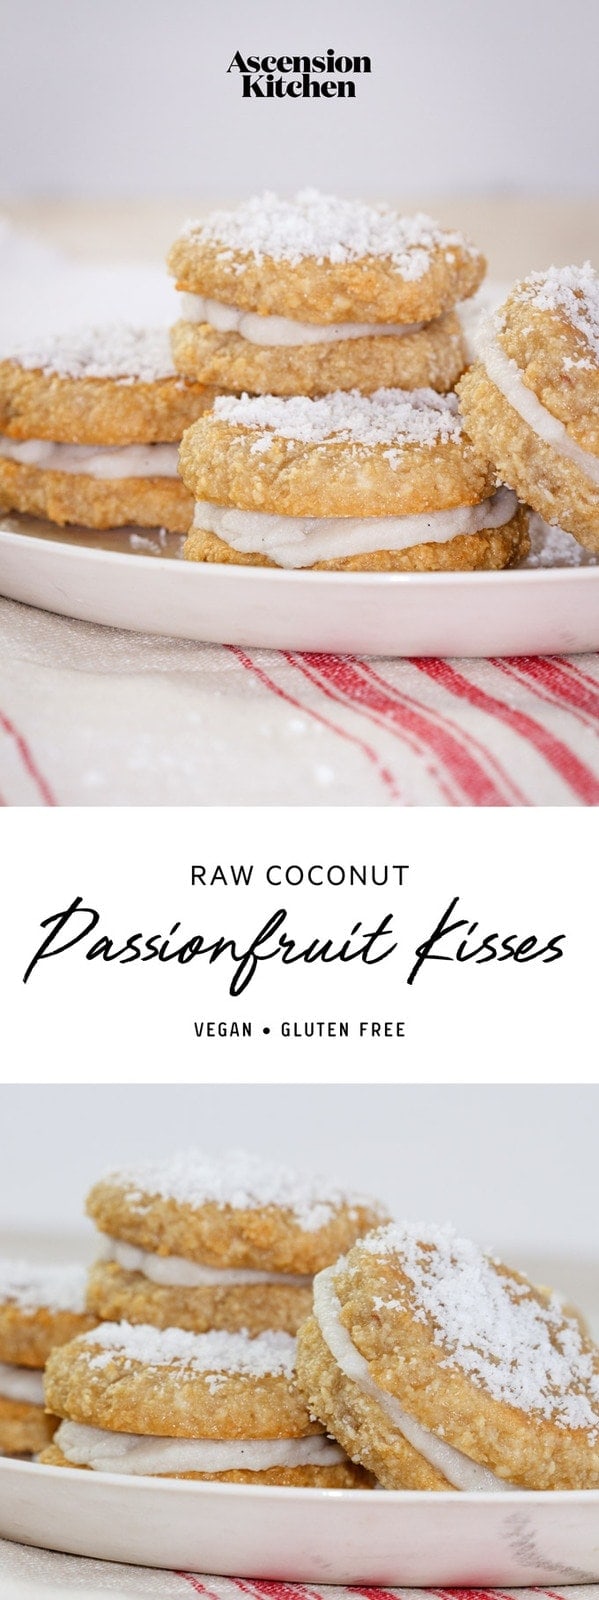 Vegan and gluten free Passionfruit Kisses! These are like melting moments cookies – light as a feather and filled with a sweet passionfruit curd. Perfect for high tea. #passionfruitkisses #passionfruitcookies #meltingmoments #meltingmomentsrecipe #meltingmomentscookies #hightearecipes #AscensionKitchen // Pin to your own inspiration board! //